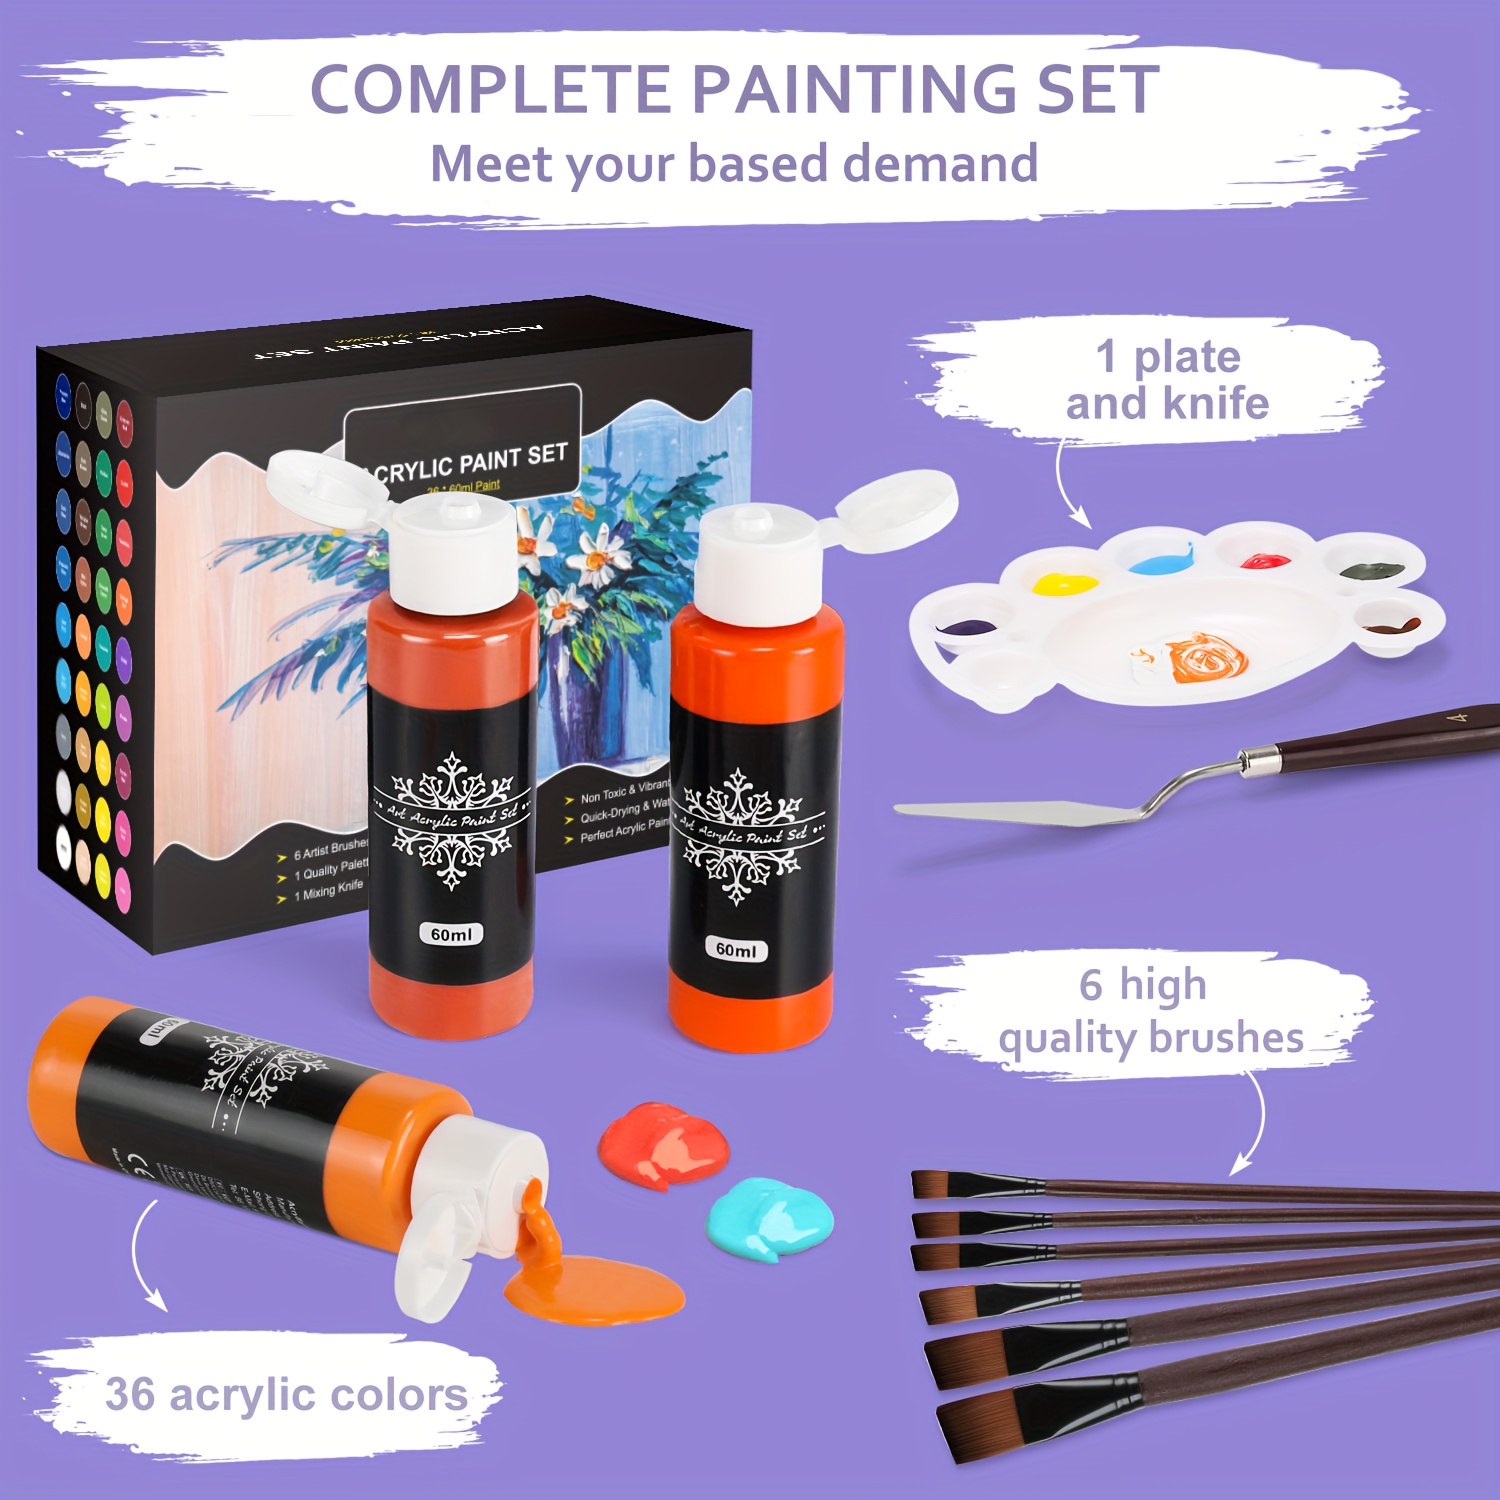 Acrylic Paint Set with 12 Art Brushes, 36 Colors (2 oz/Bottle) Acrylic Paint  for Painting Canvas, Wood, Ceramic and Fabric, Paint Set for Beginners,  Students and Professional Artist, Rich Pigments 